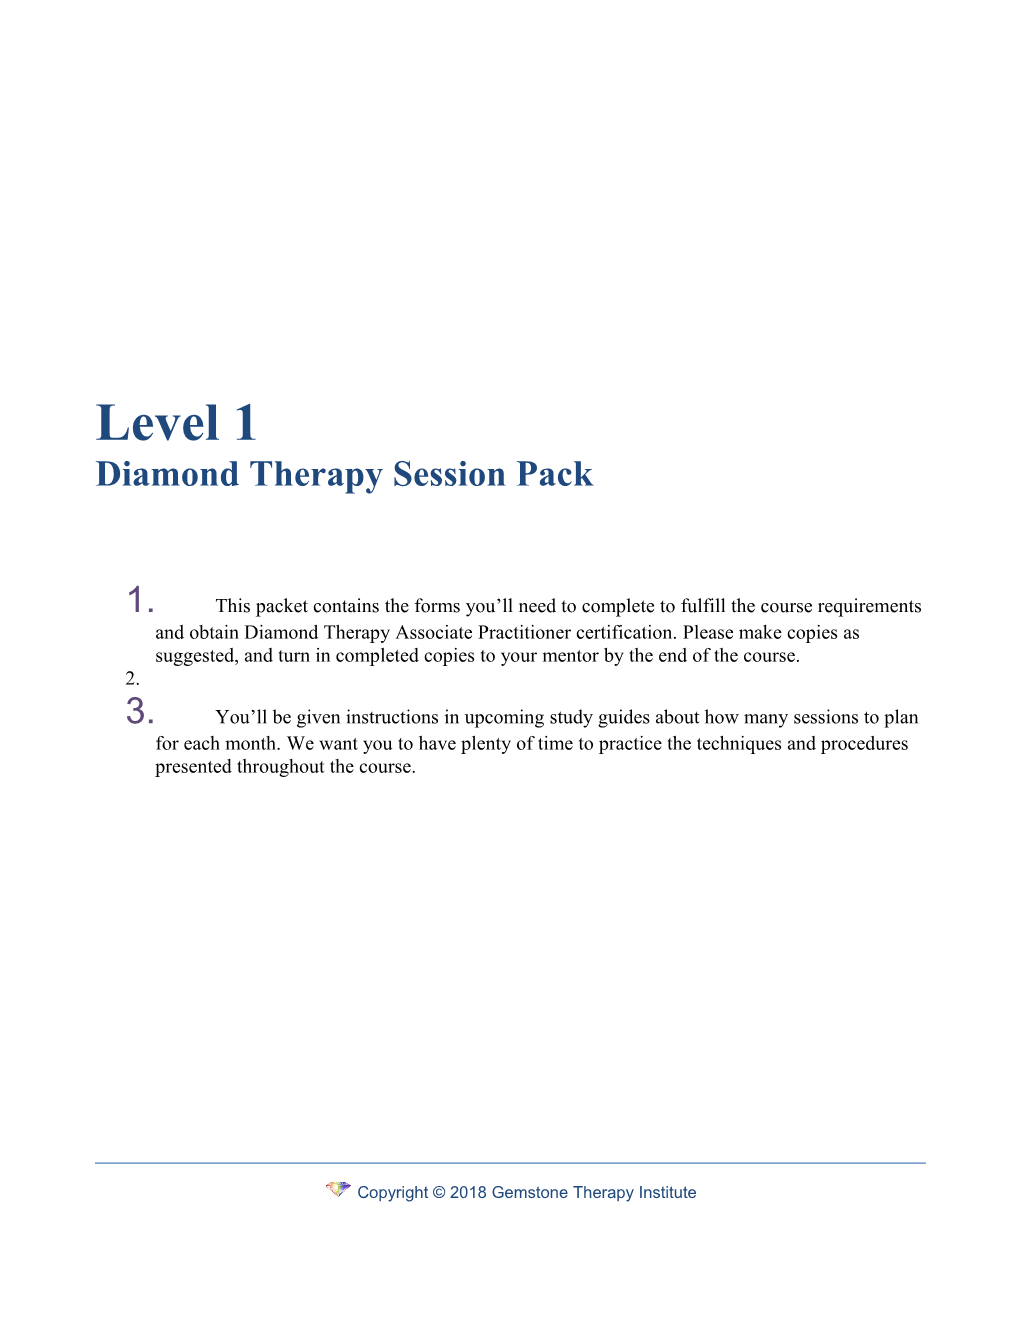 Diamond Therapy Session Packet